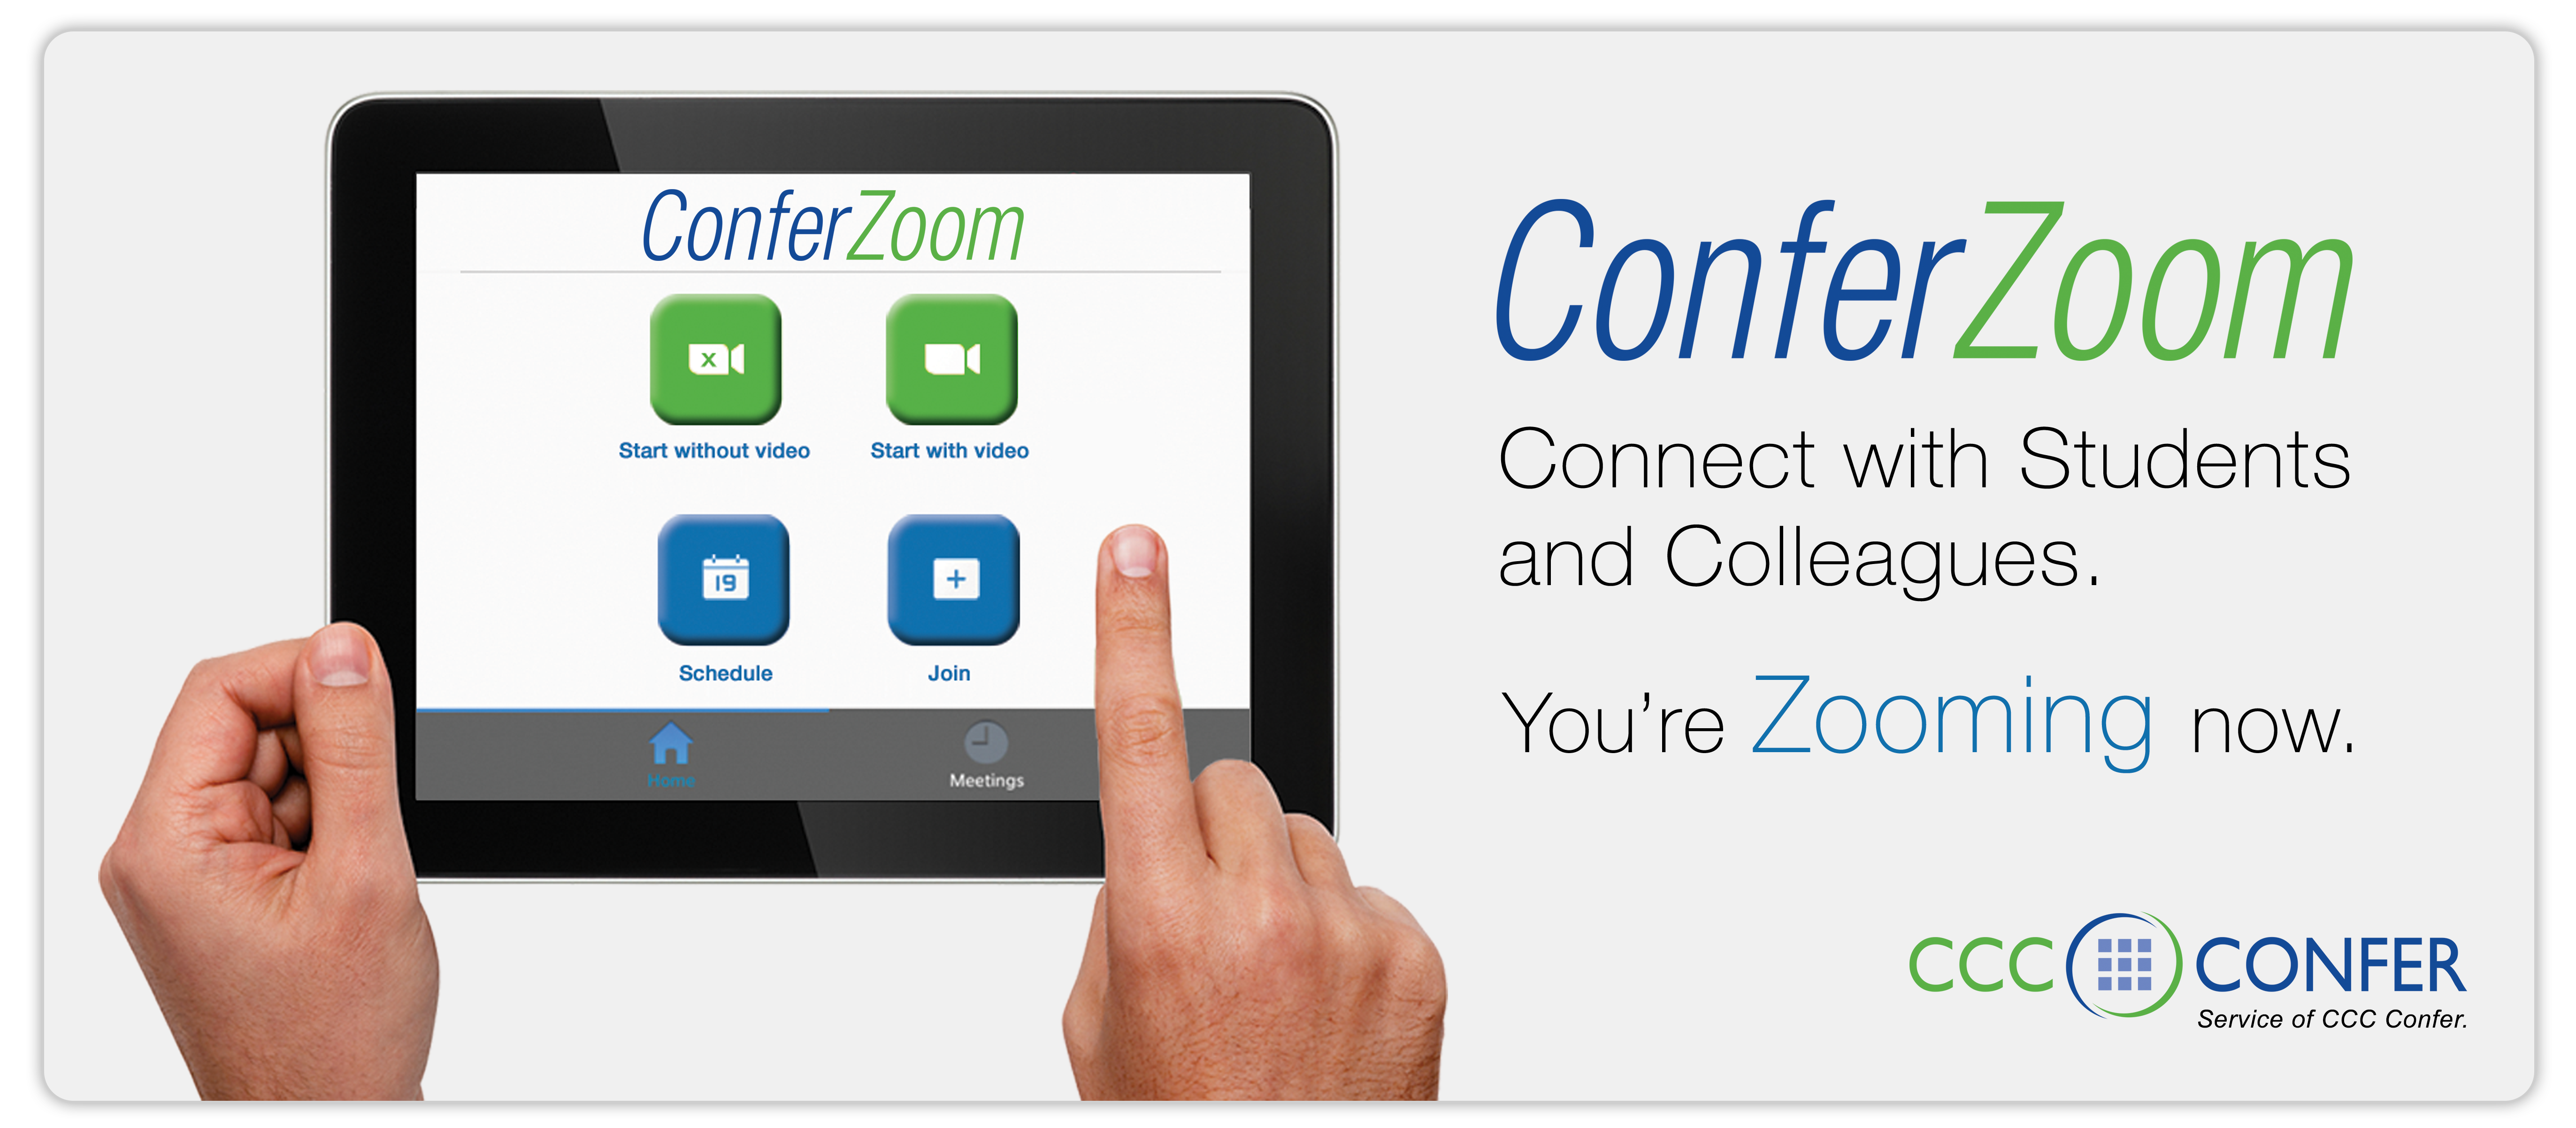 CCC ConferZoom is used by many at the Peralta Colleges